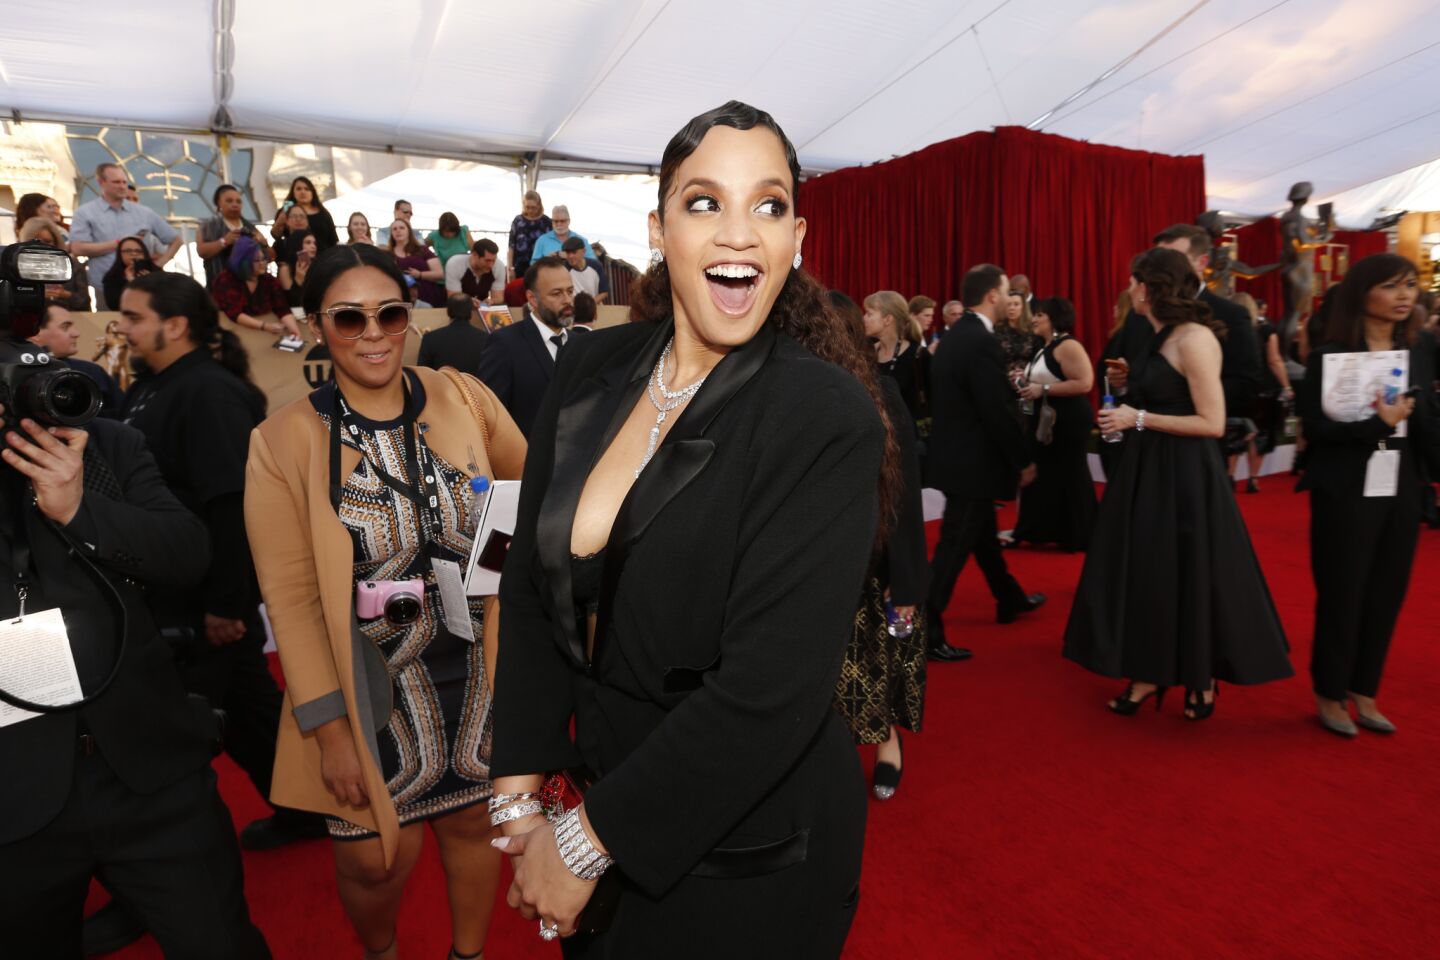 Dascha Polanco is nominated with her "Orange Is the New Black" cast mates.